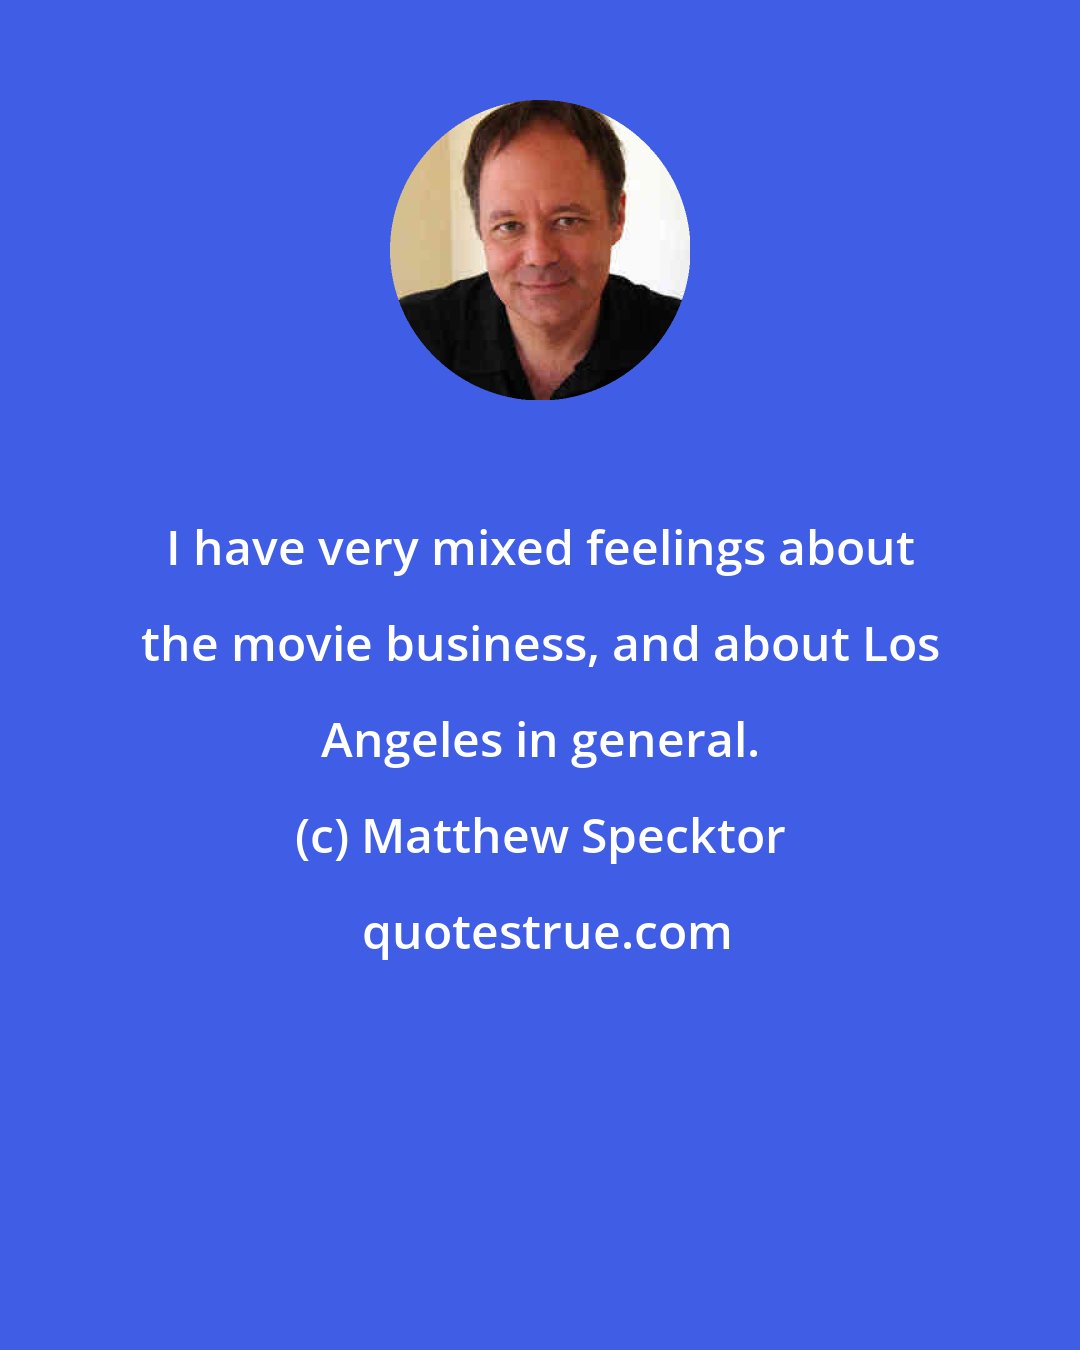 Matthew Specktor: I have very mixed feelings about the movie business, and about Los Angeles in general.